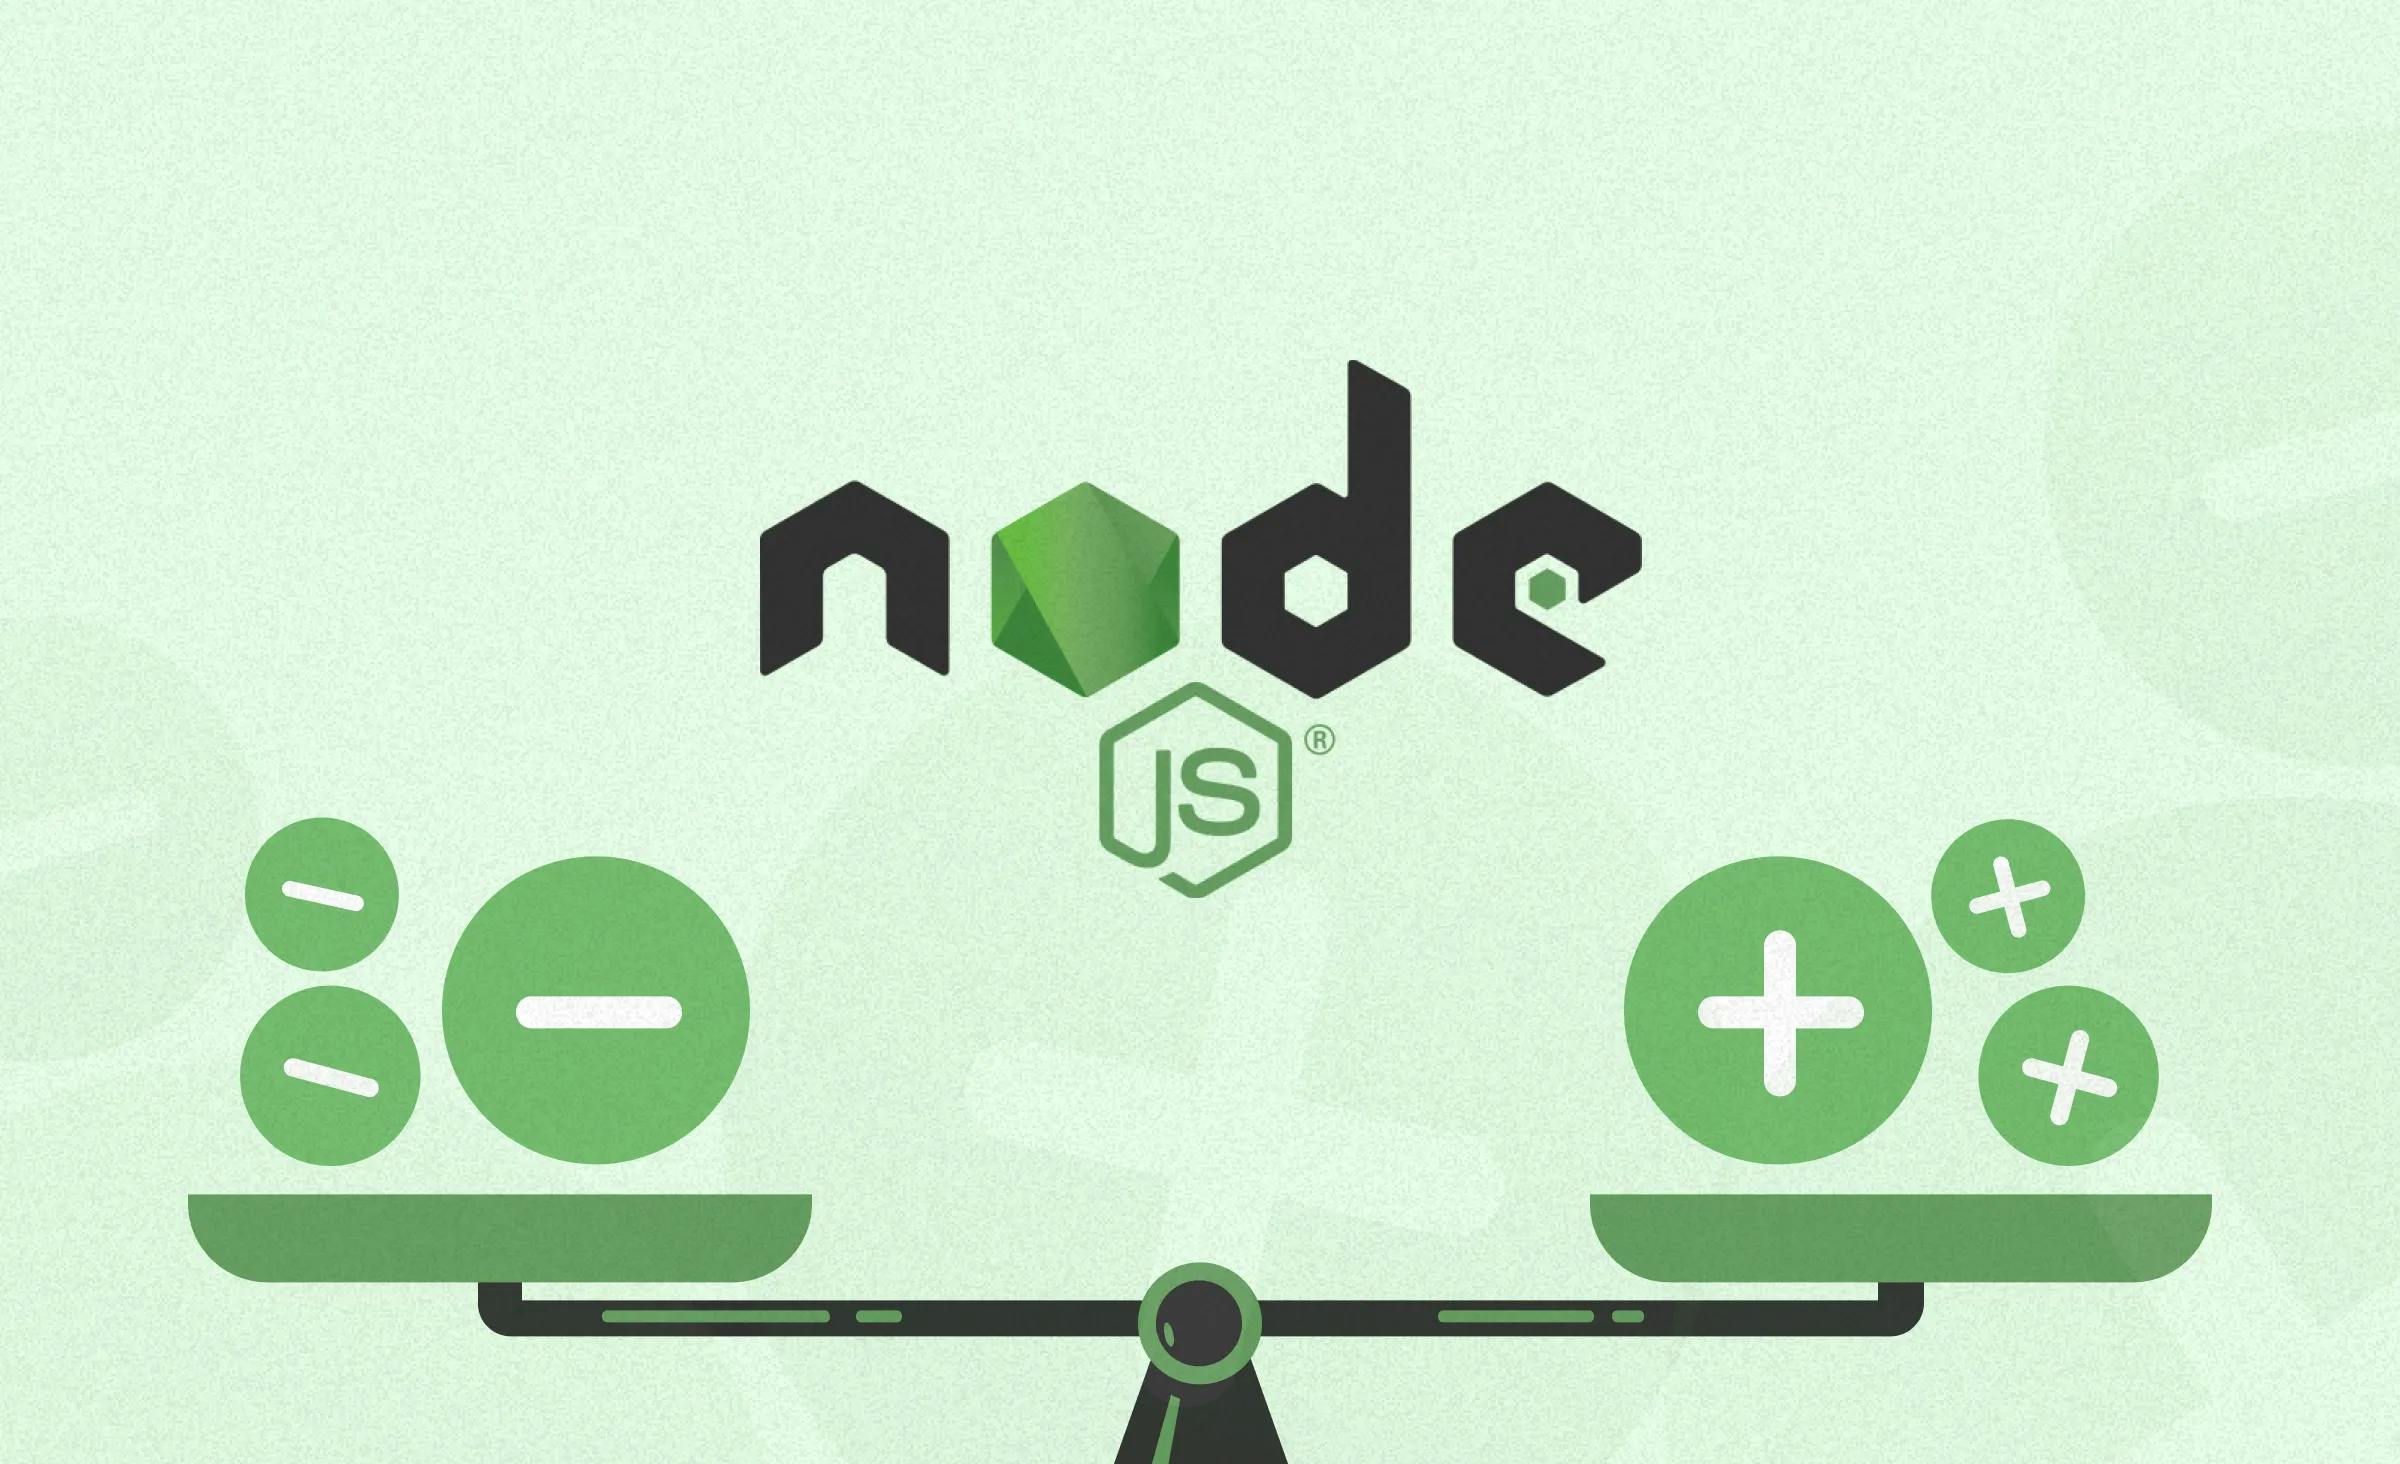 Pros and cons of using Node.js for web development